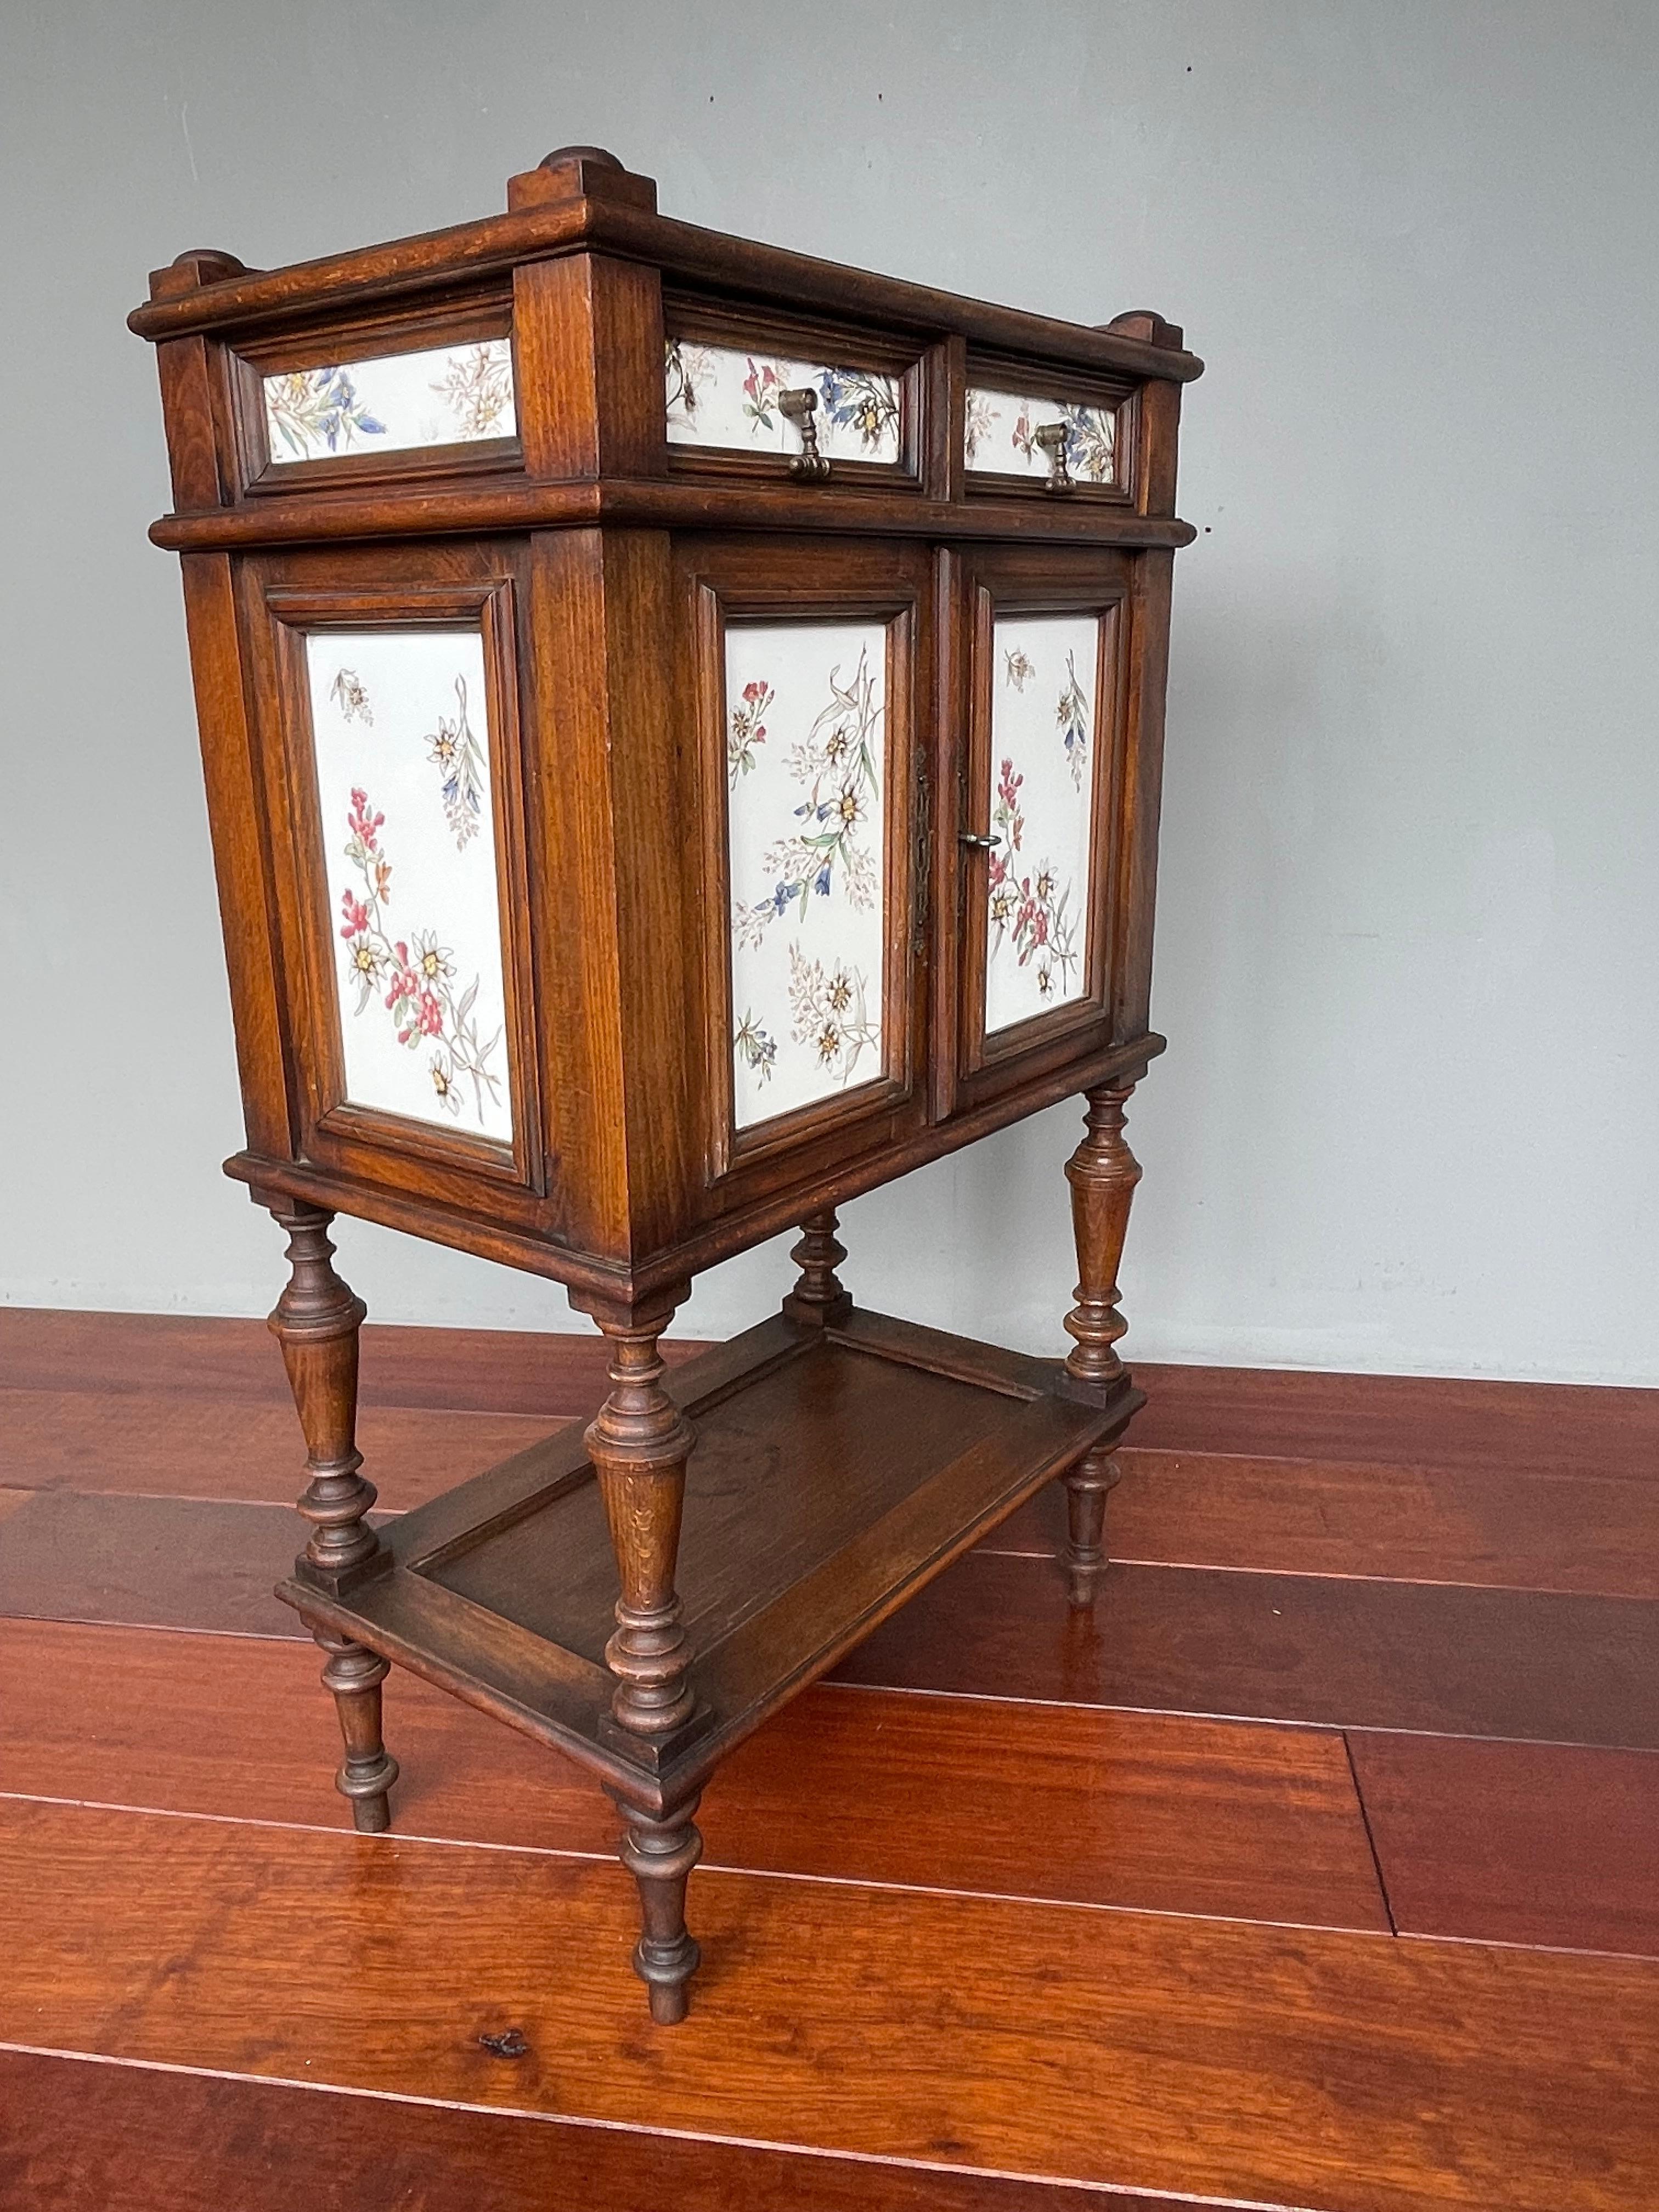 Rare Antique Drinks Cabinet w. Many Inlaid, Hand Painted and Glazed Tiles ca1900 For Sale 7